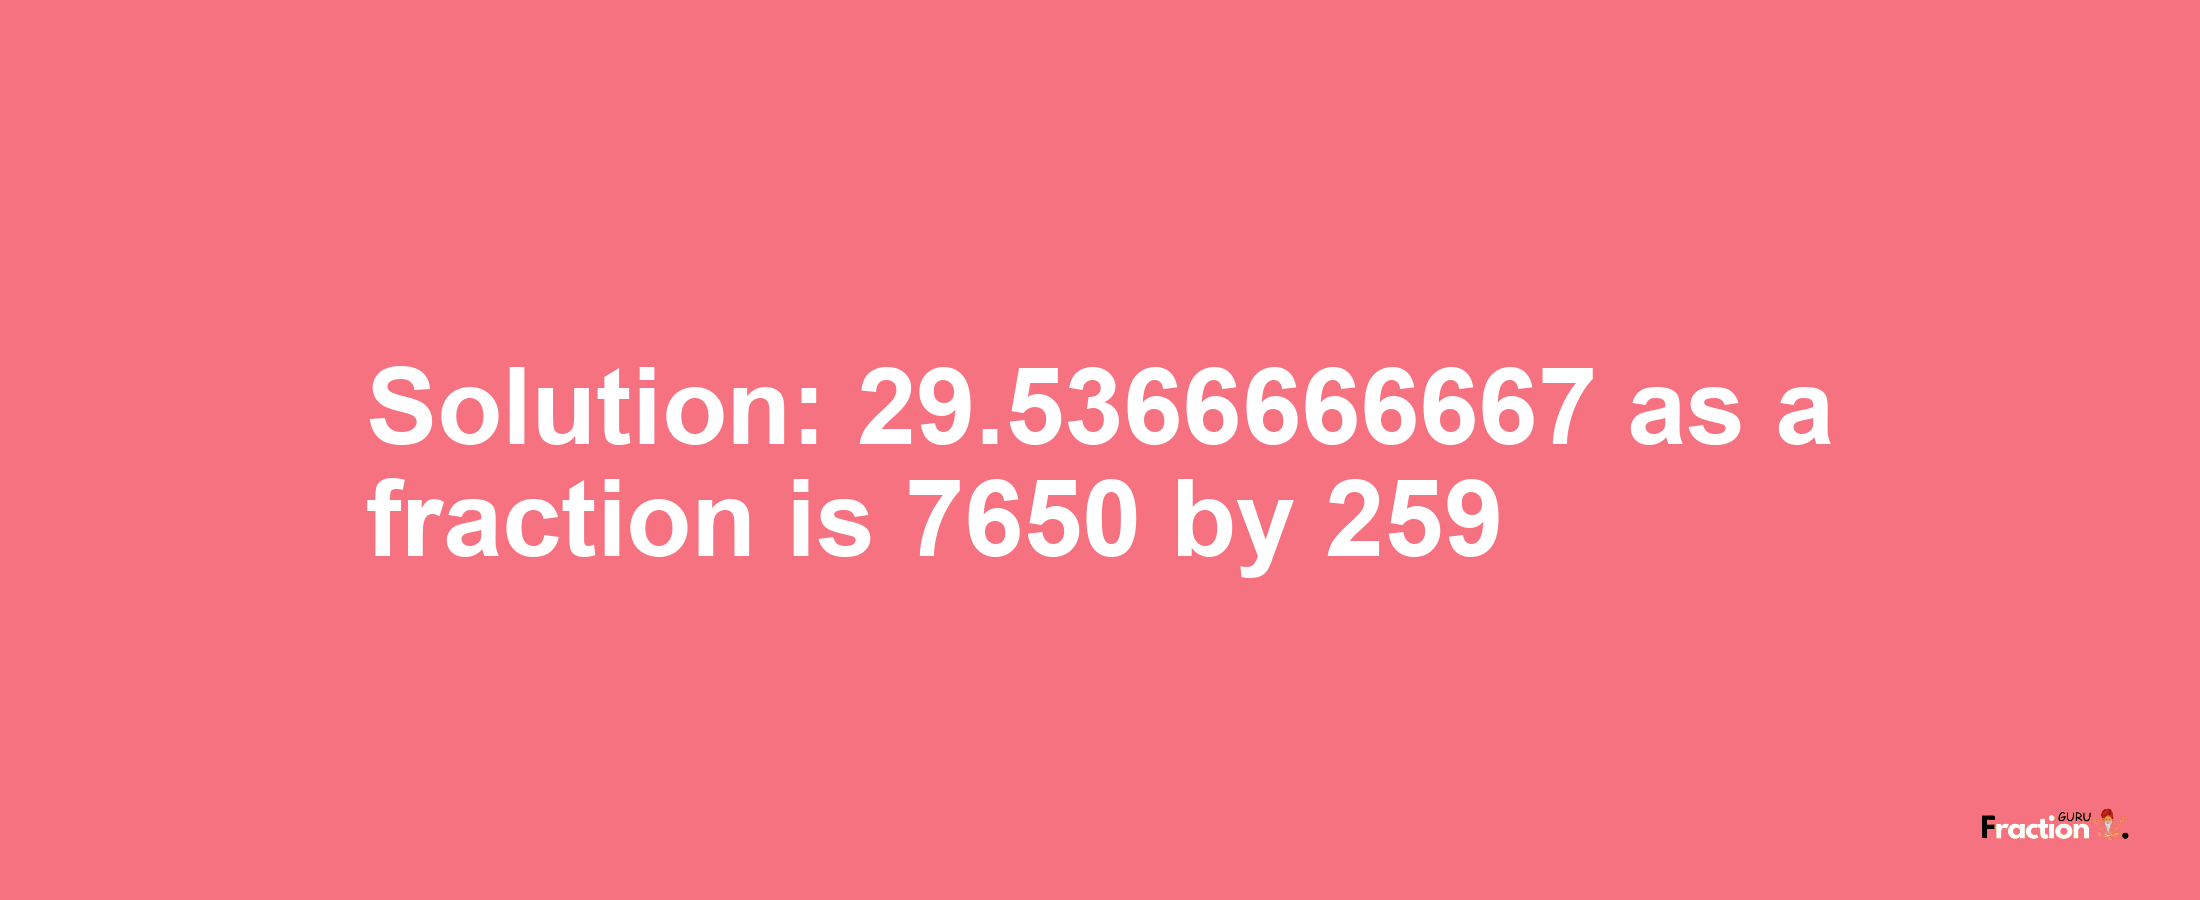 Solution:29.5366666667 as a fraction is 7650/259